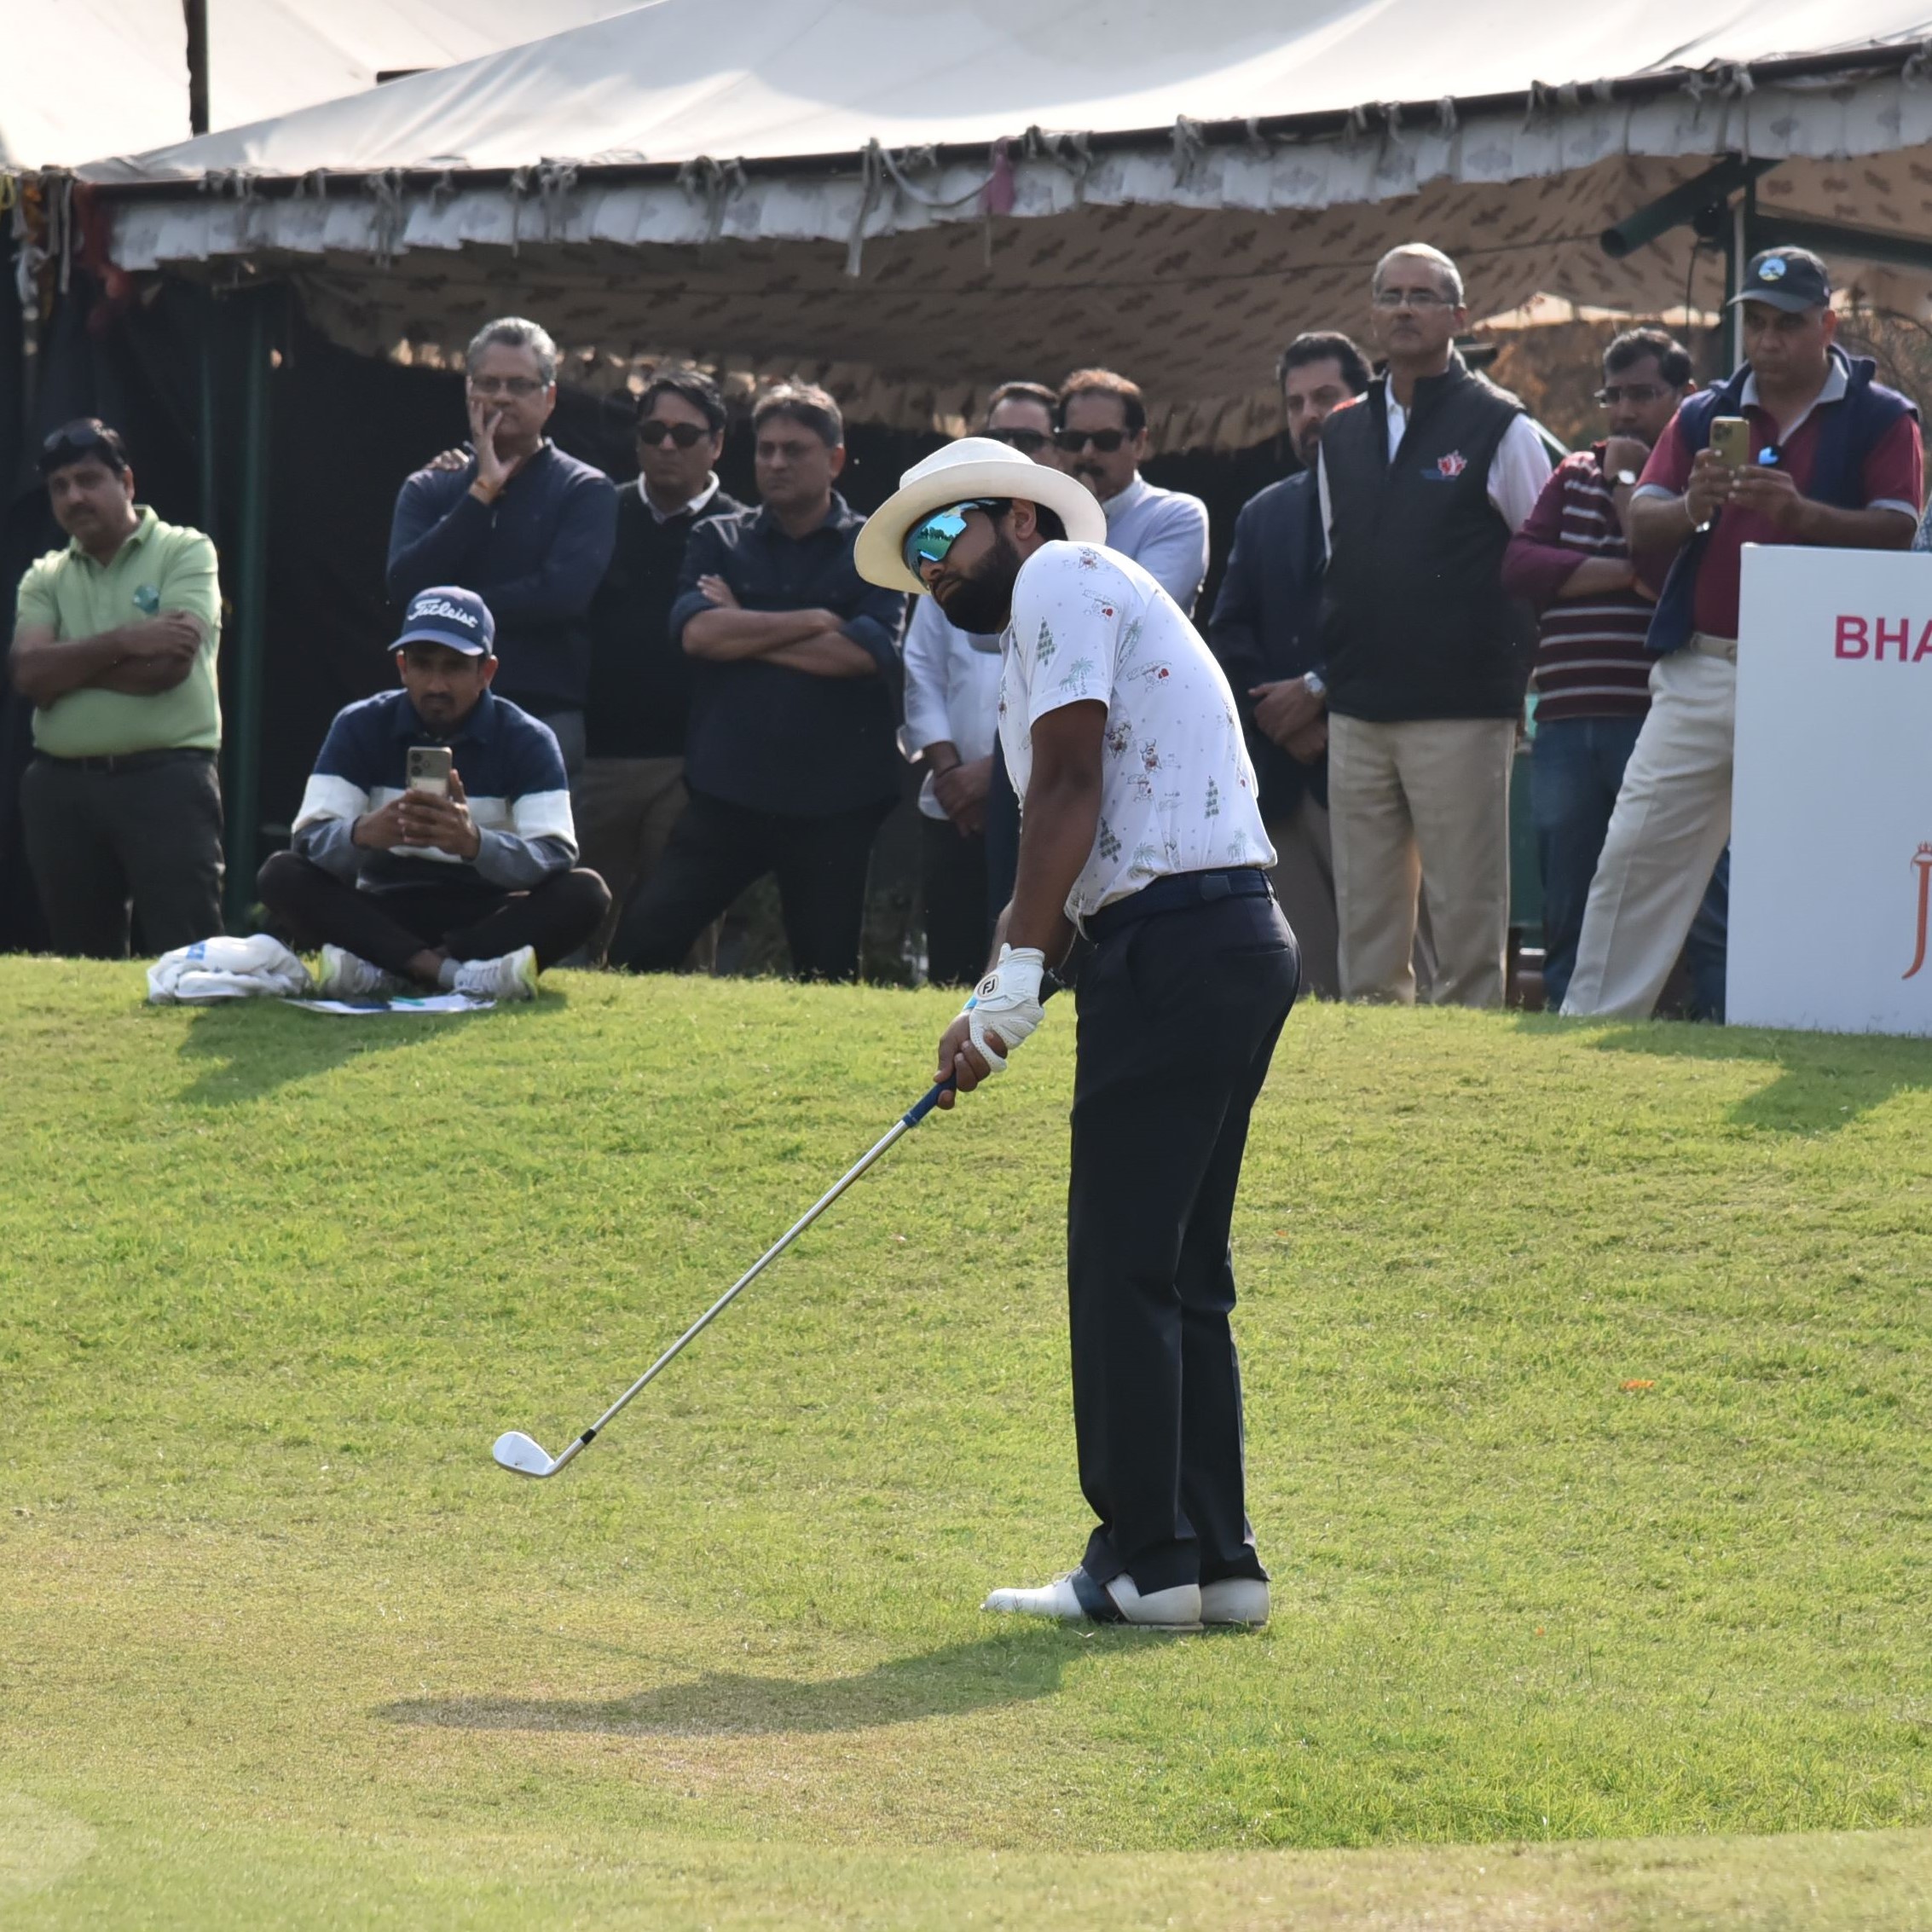 Sachin Baisoya establishes lead with 64 on day one of PGTI Players  Championship 2023